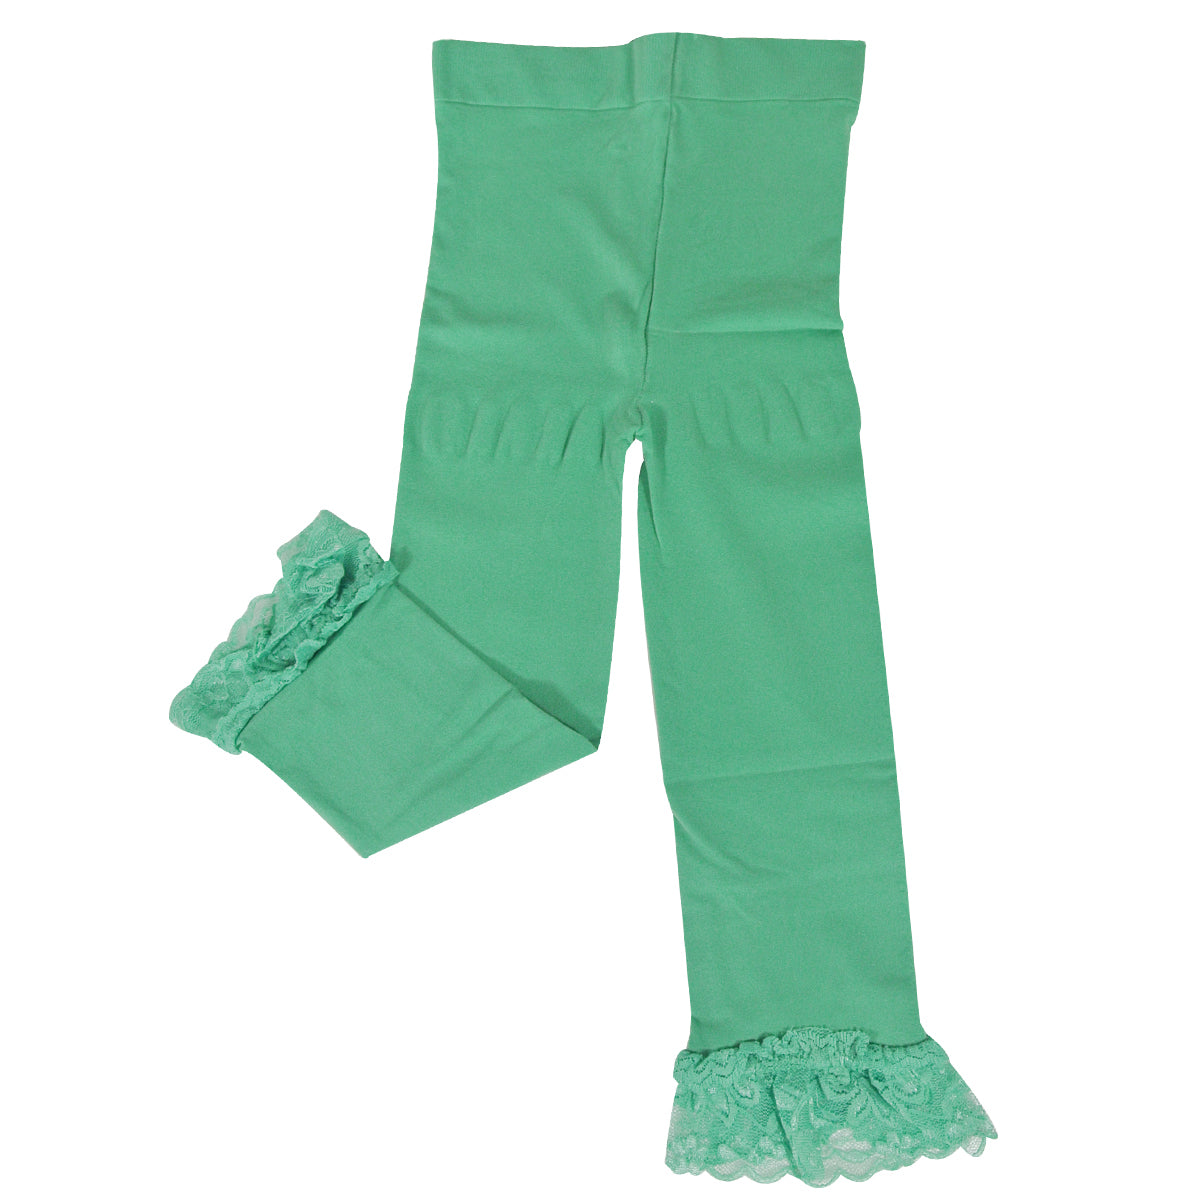 Wrapables Toddler Stretch Leggings with Lace Trim, Set of 3 (Blue, Green, Black)